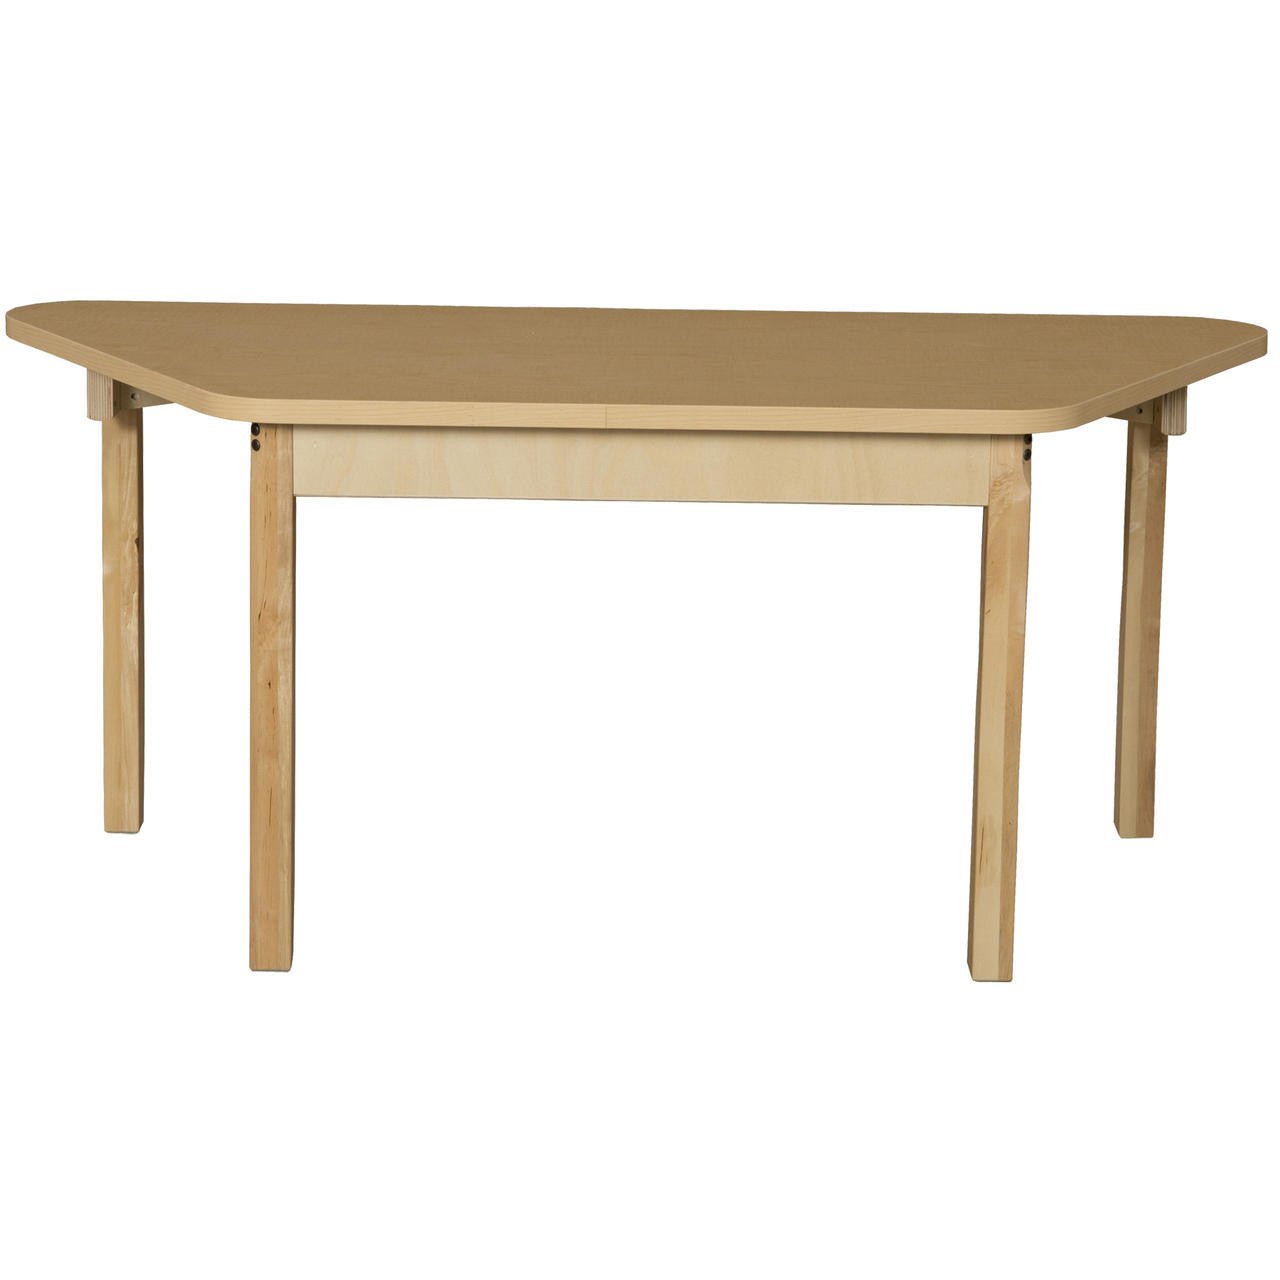 Trapezoidal High Pressure Laminate Table with Hardwood Legs- 29"